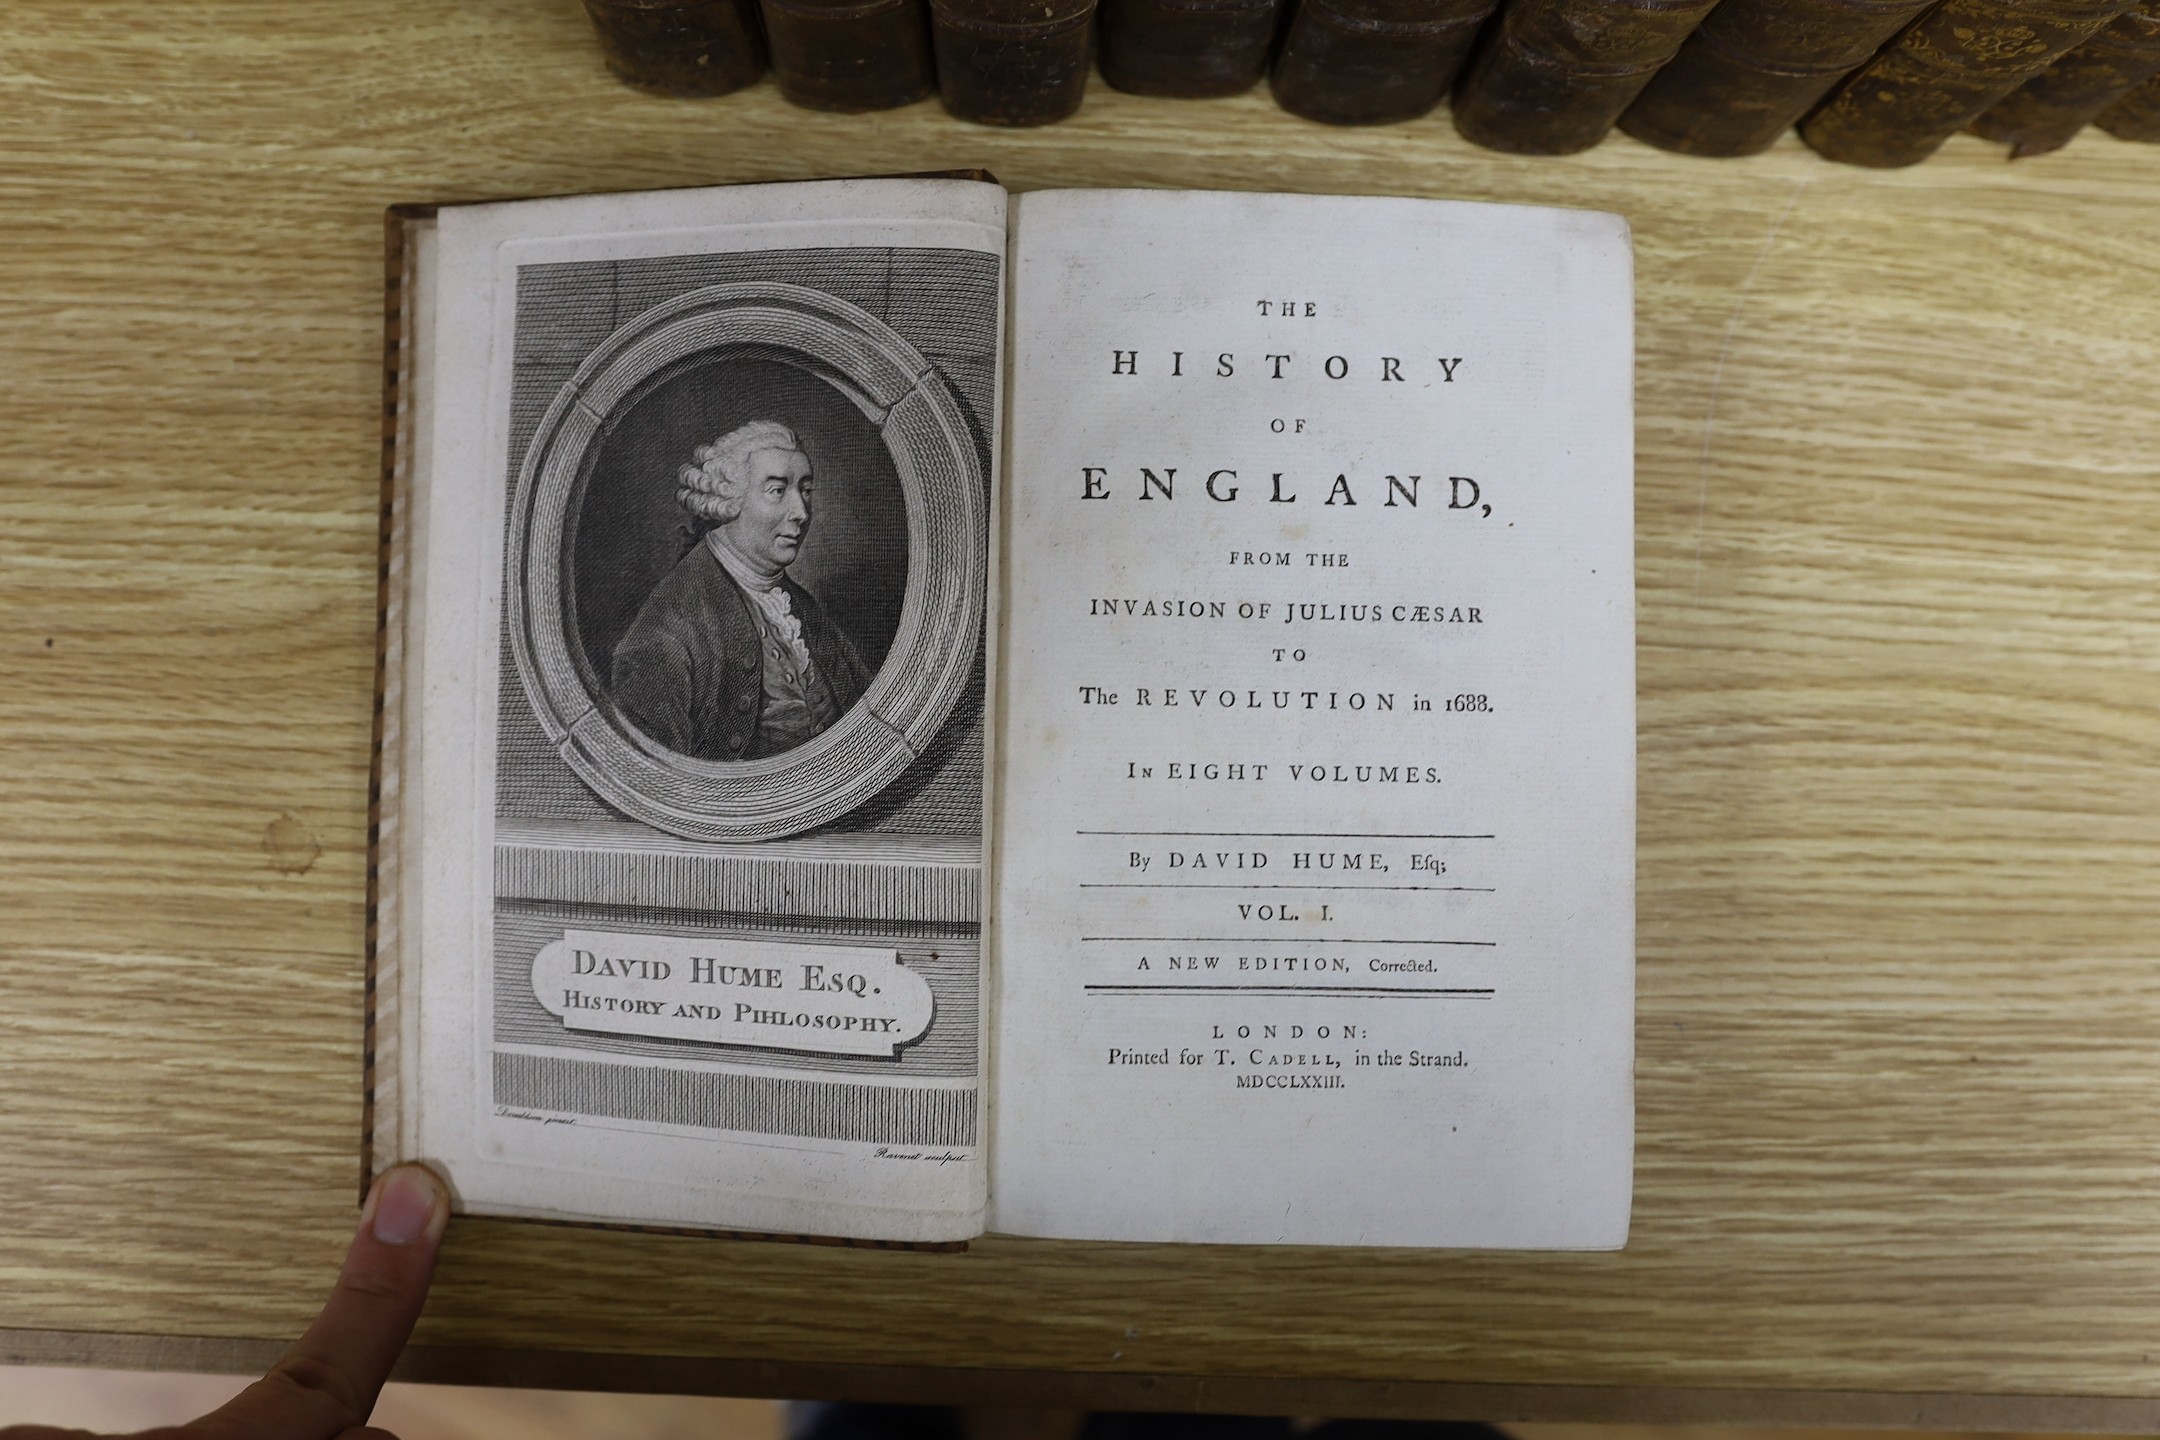 Hume, David - The History of England, 8 vols, 8vo, calf, T.Cadell, London, 1773 and Smollett, Tobias - The History of England, 5 vols, 8vo, calf, T. Cadell, London, 1788. (13)